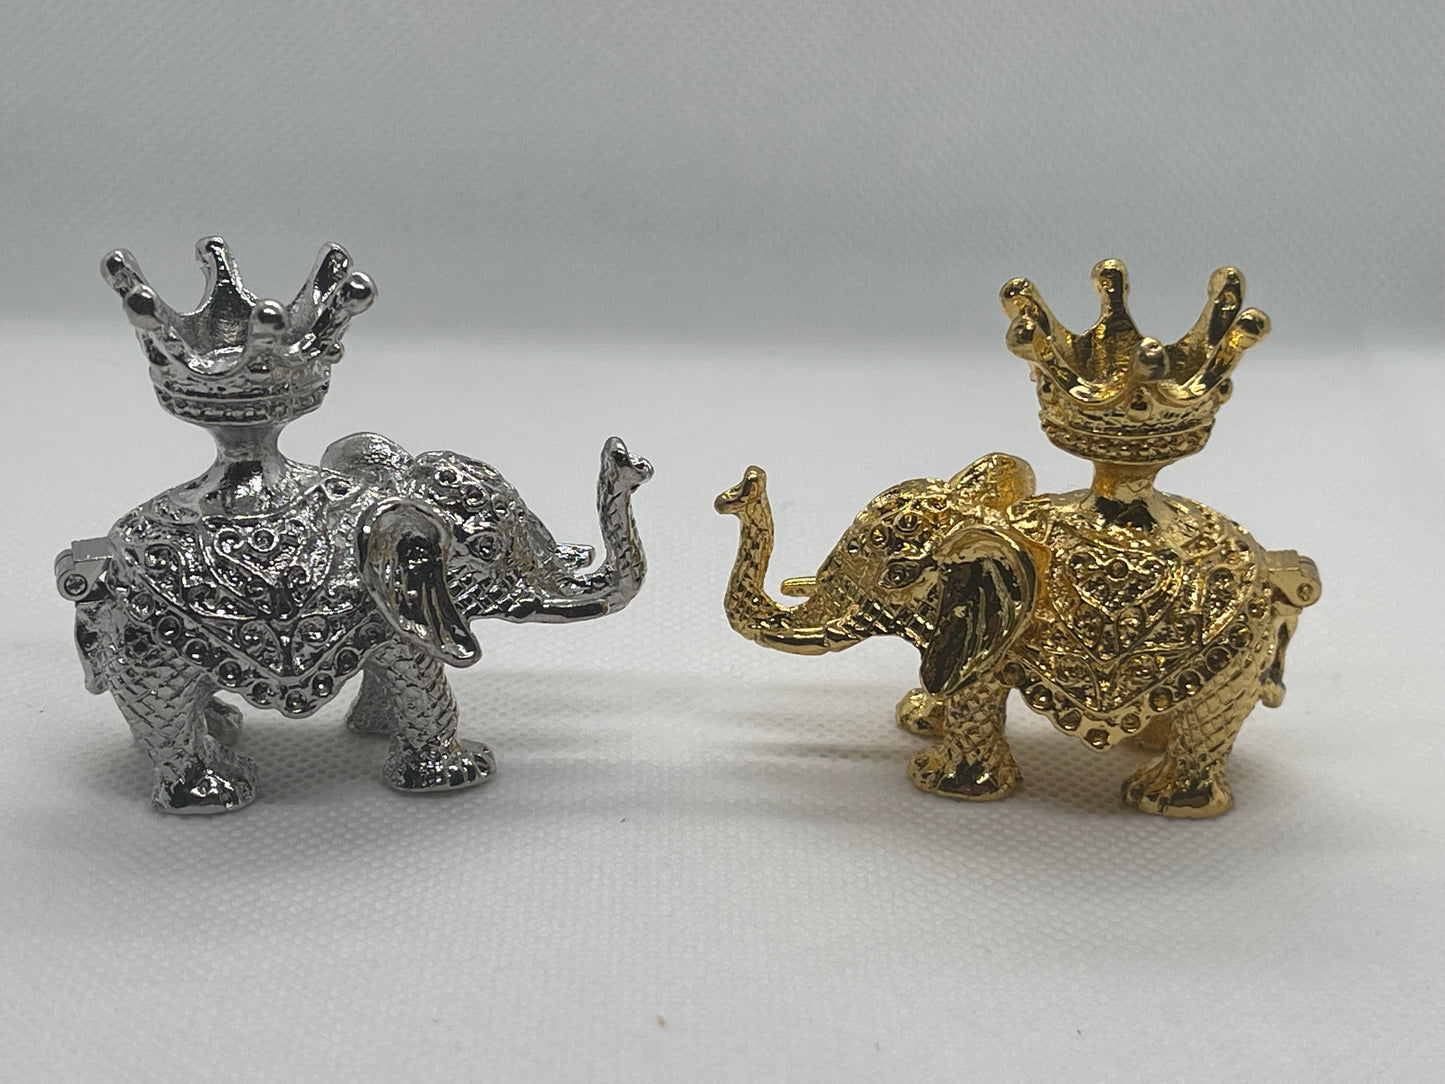 Gold and Silver Elephant Sphere Stands